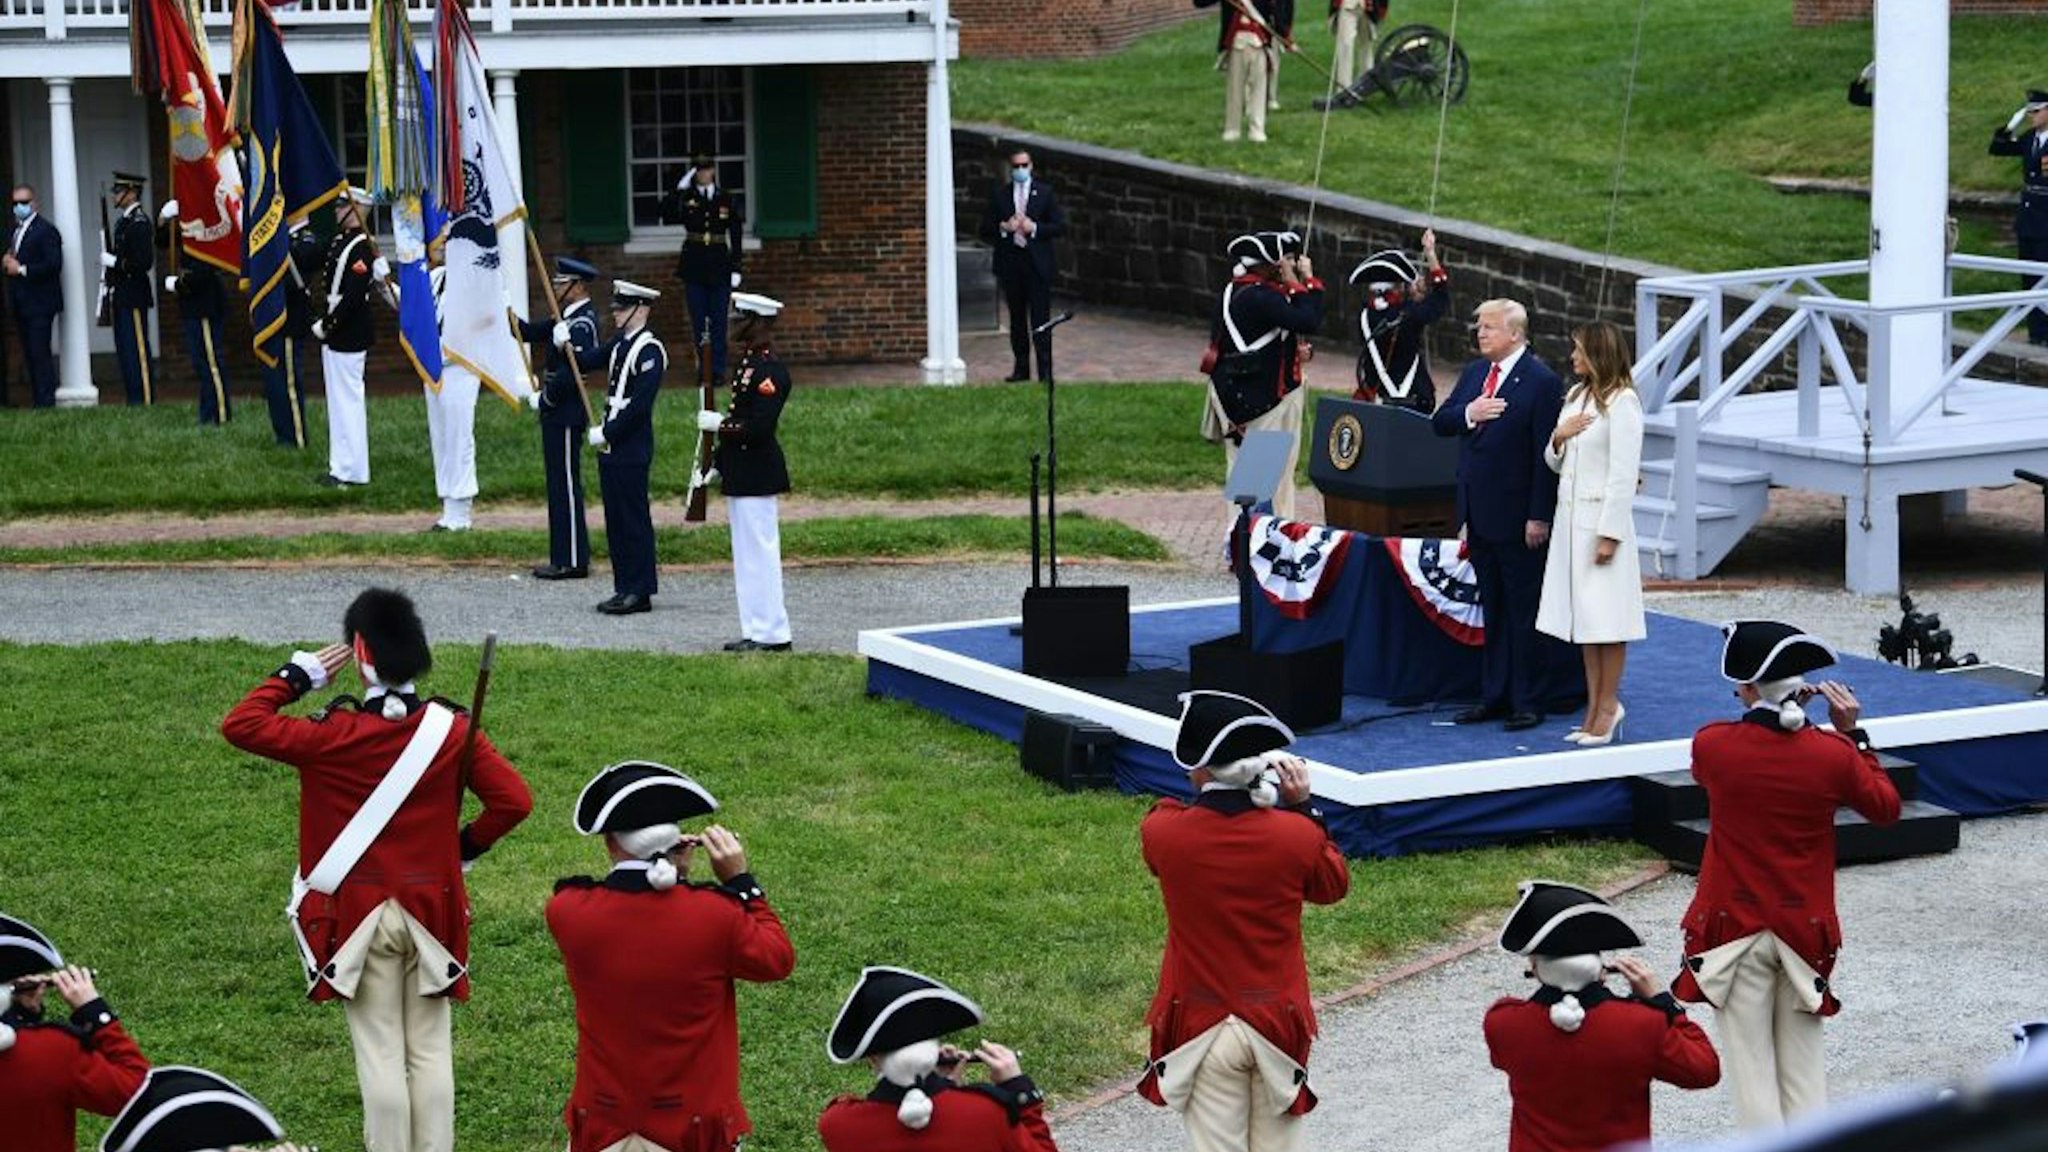 US President Donald Trump(C) and First Lady Melania Trump put their hands on their heart as they participate in a Memorial Day Ceremony at Fort McHenry National Monument and Historic Shrine on May 25, 2020 in Baltimore, Maryland. (Photo by Brendan Smialowski / AFP)